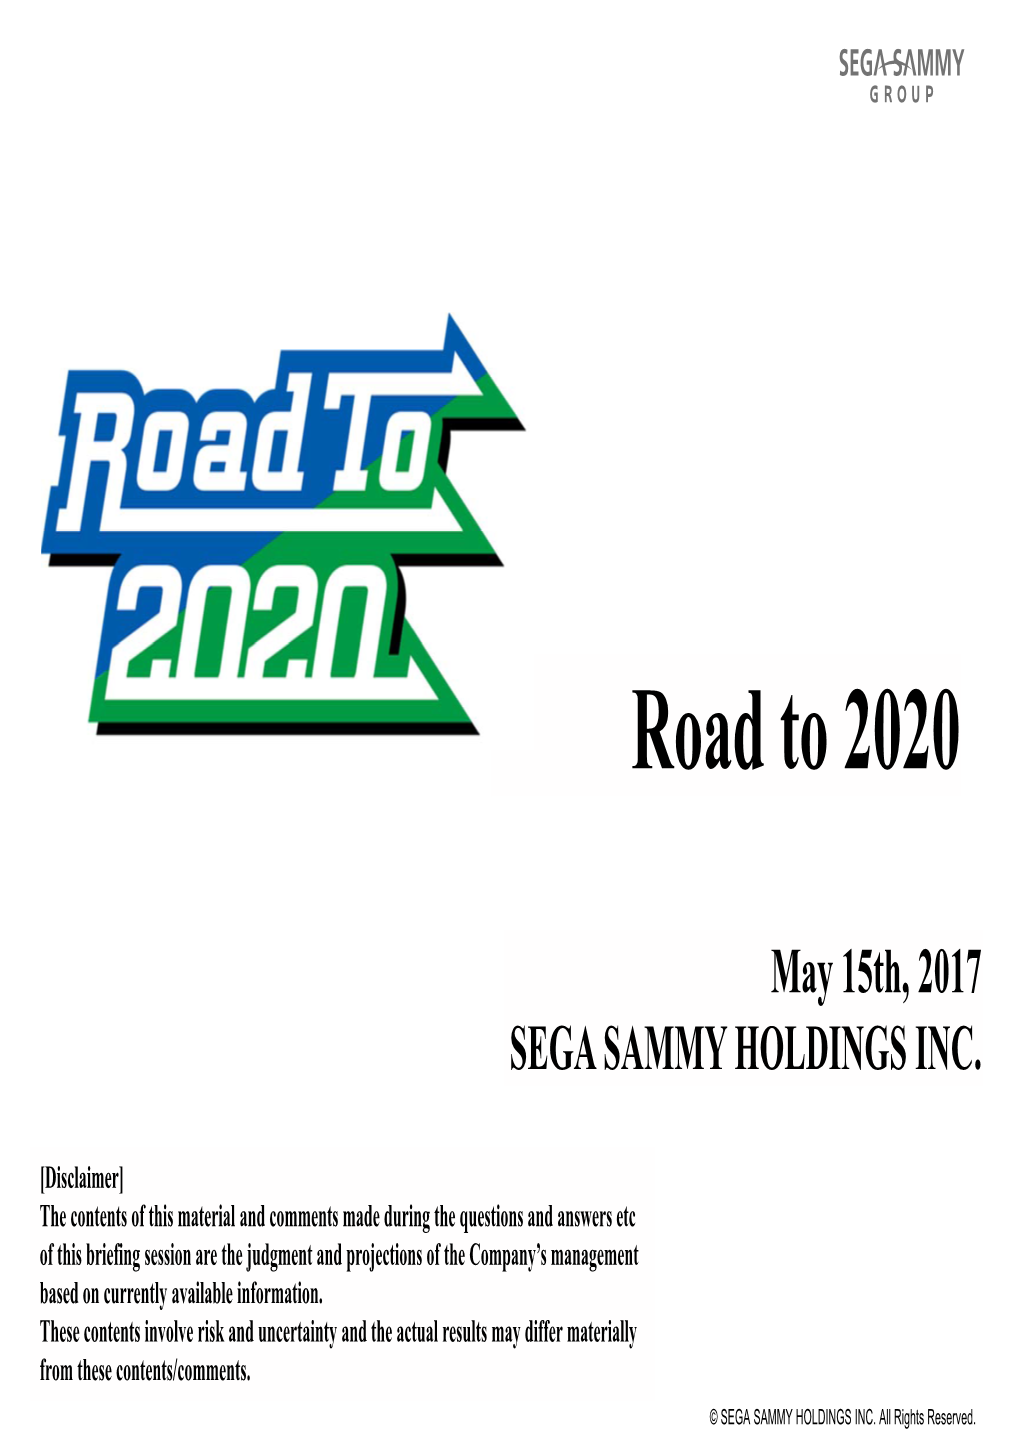 2017/05/15 Road to 2020